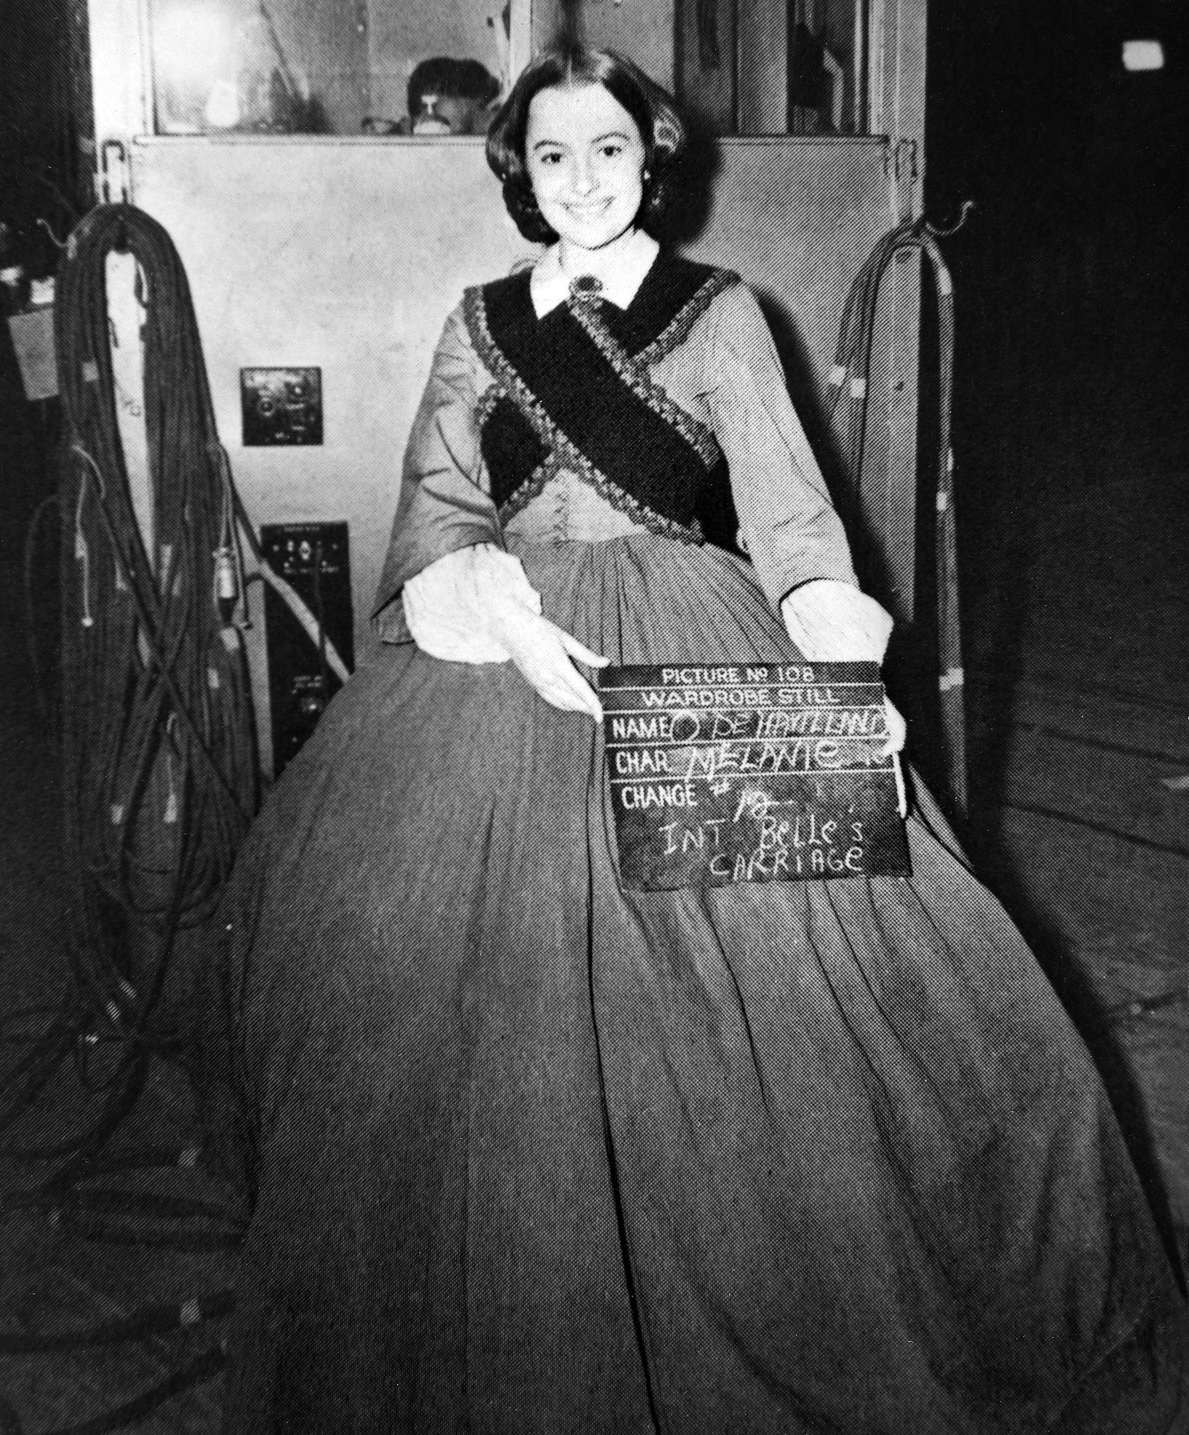 Olivia de Havilland as Melanie Hamilton on the set of Gone with the Wind in 1939.